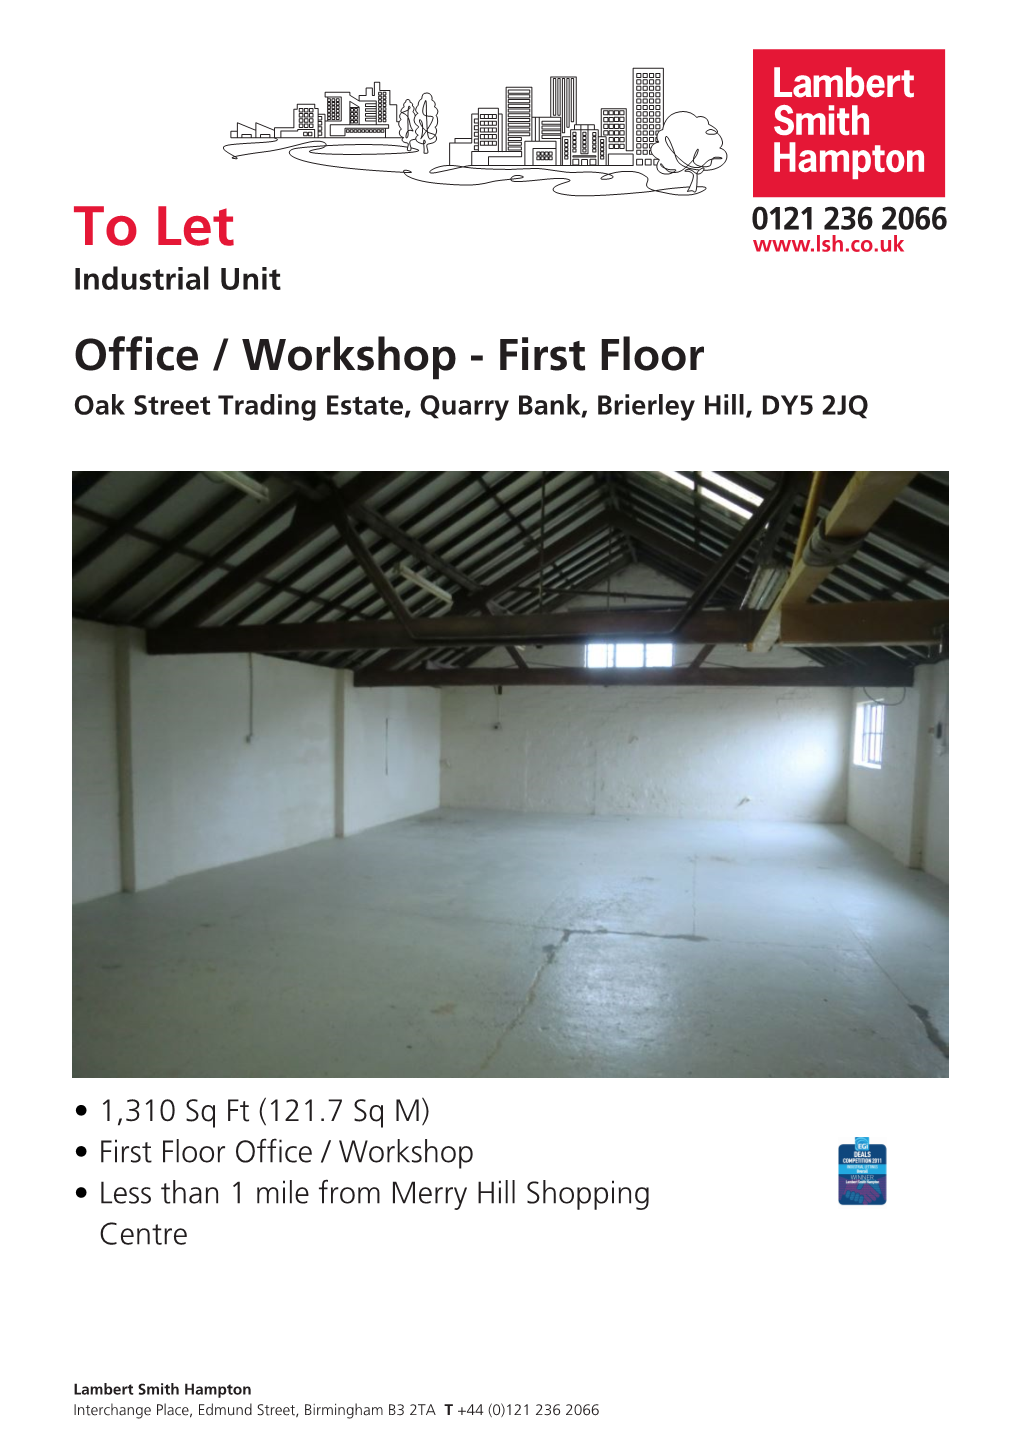 To Let,Oak Street Trading Estate, Quarry Bank, Brierley Hill, DY5